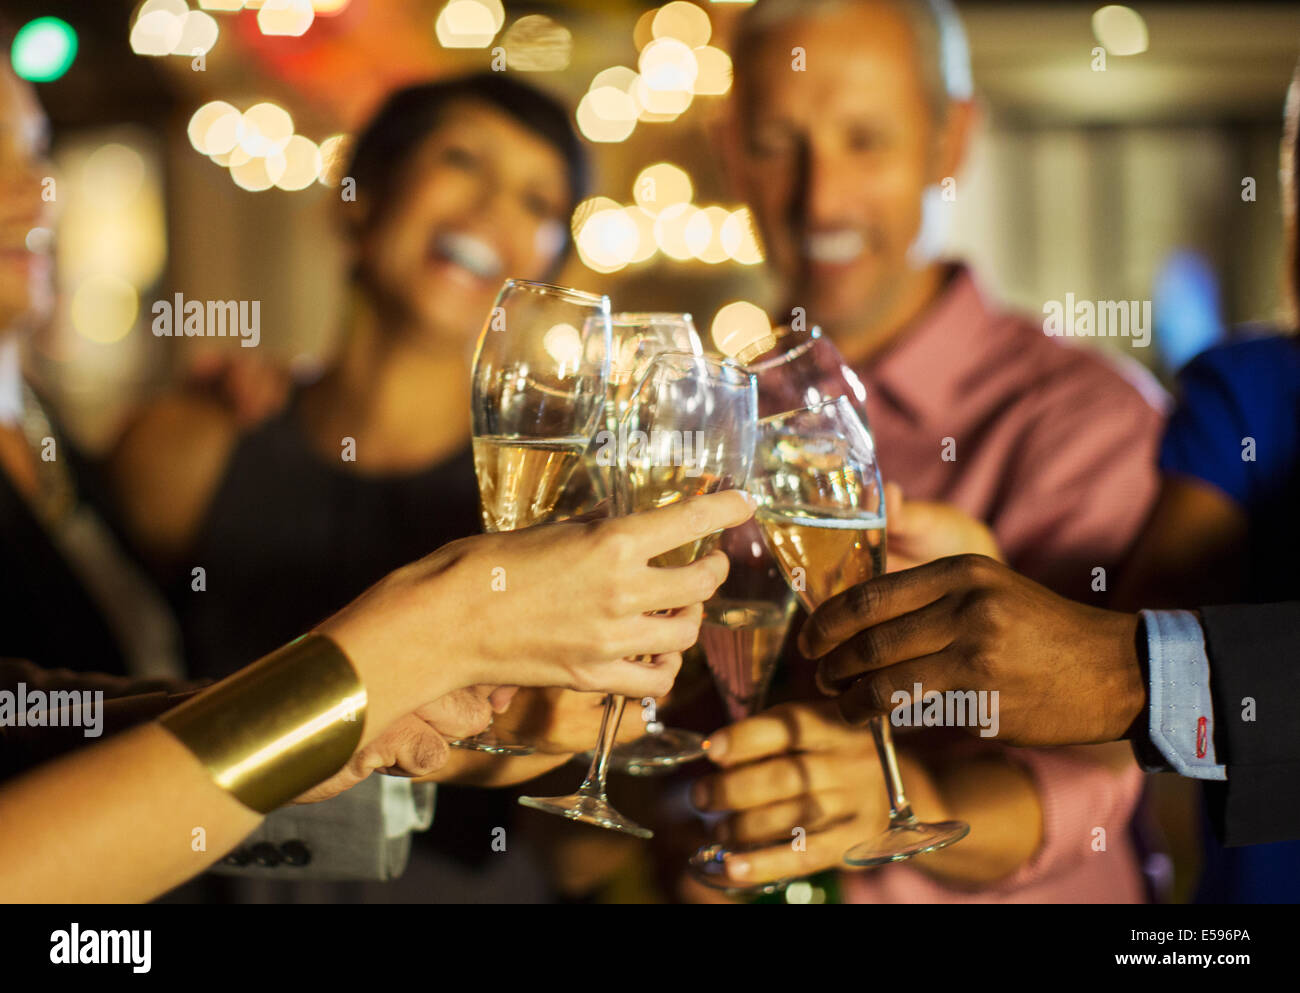 Friends toasting each other at party Stock Photo